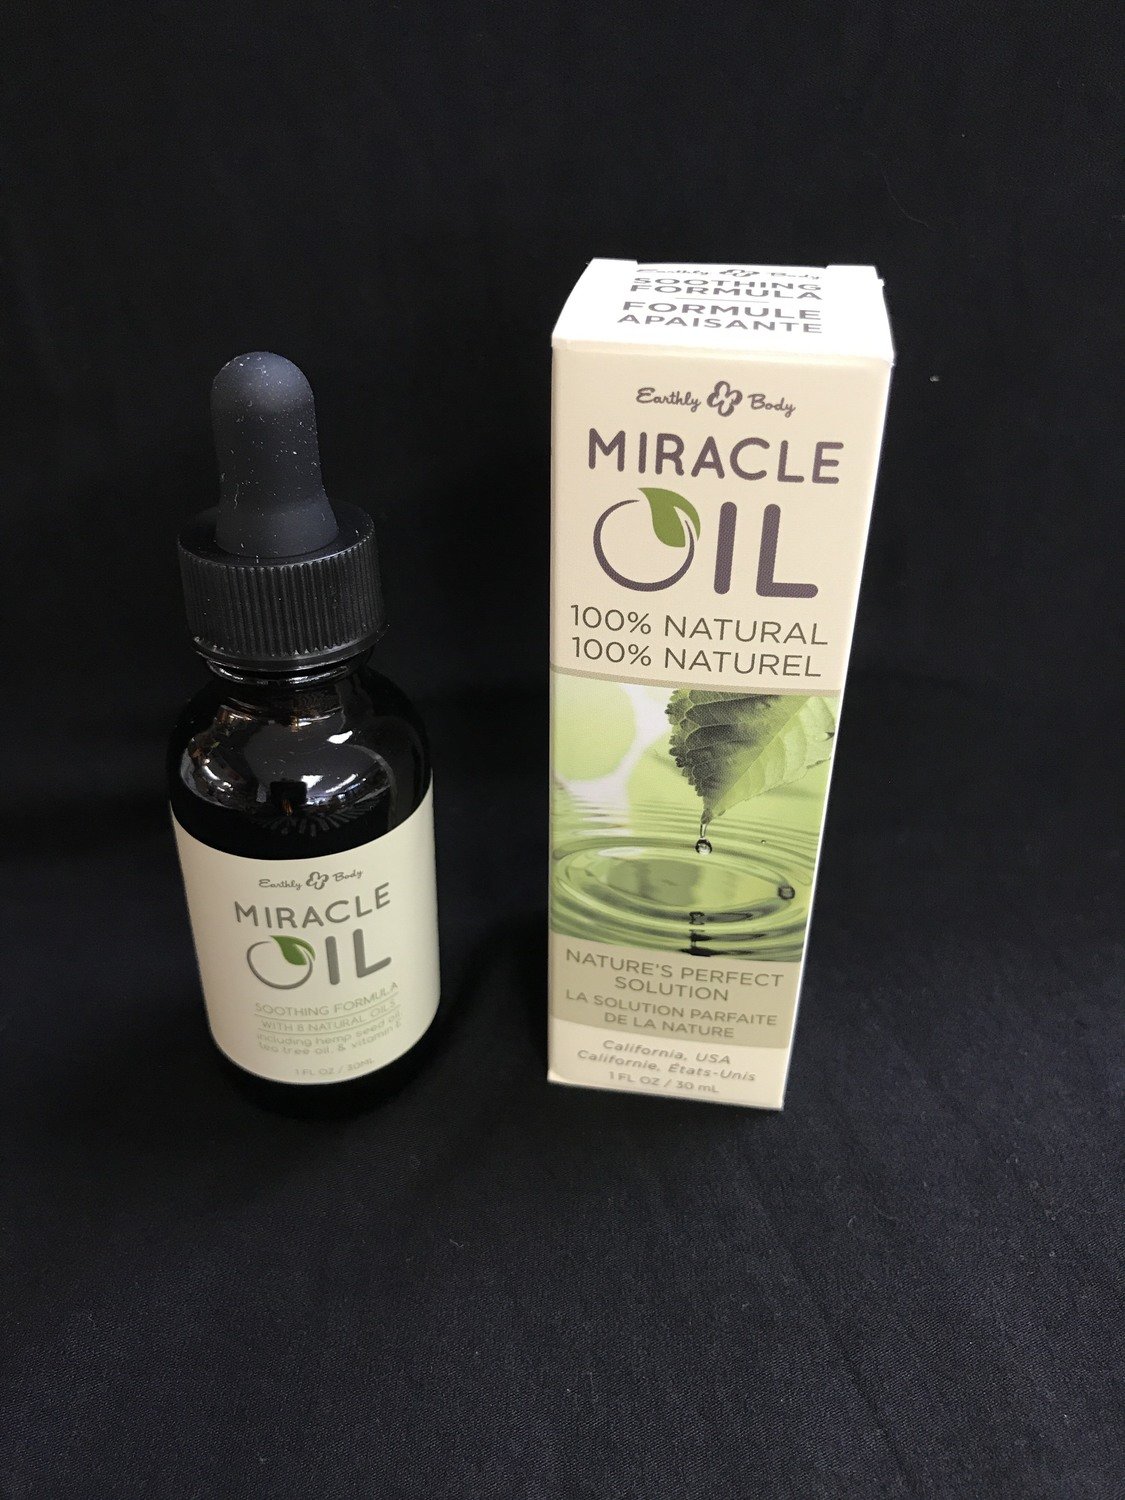 Miracle Oil